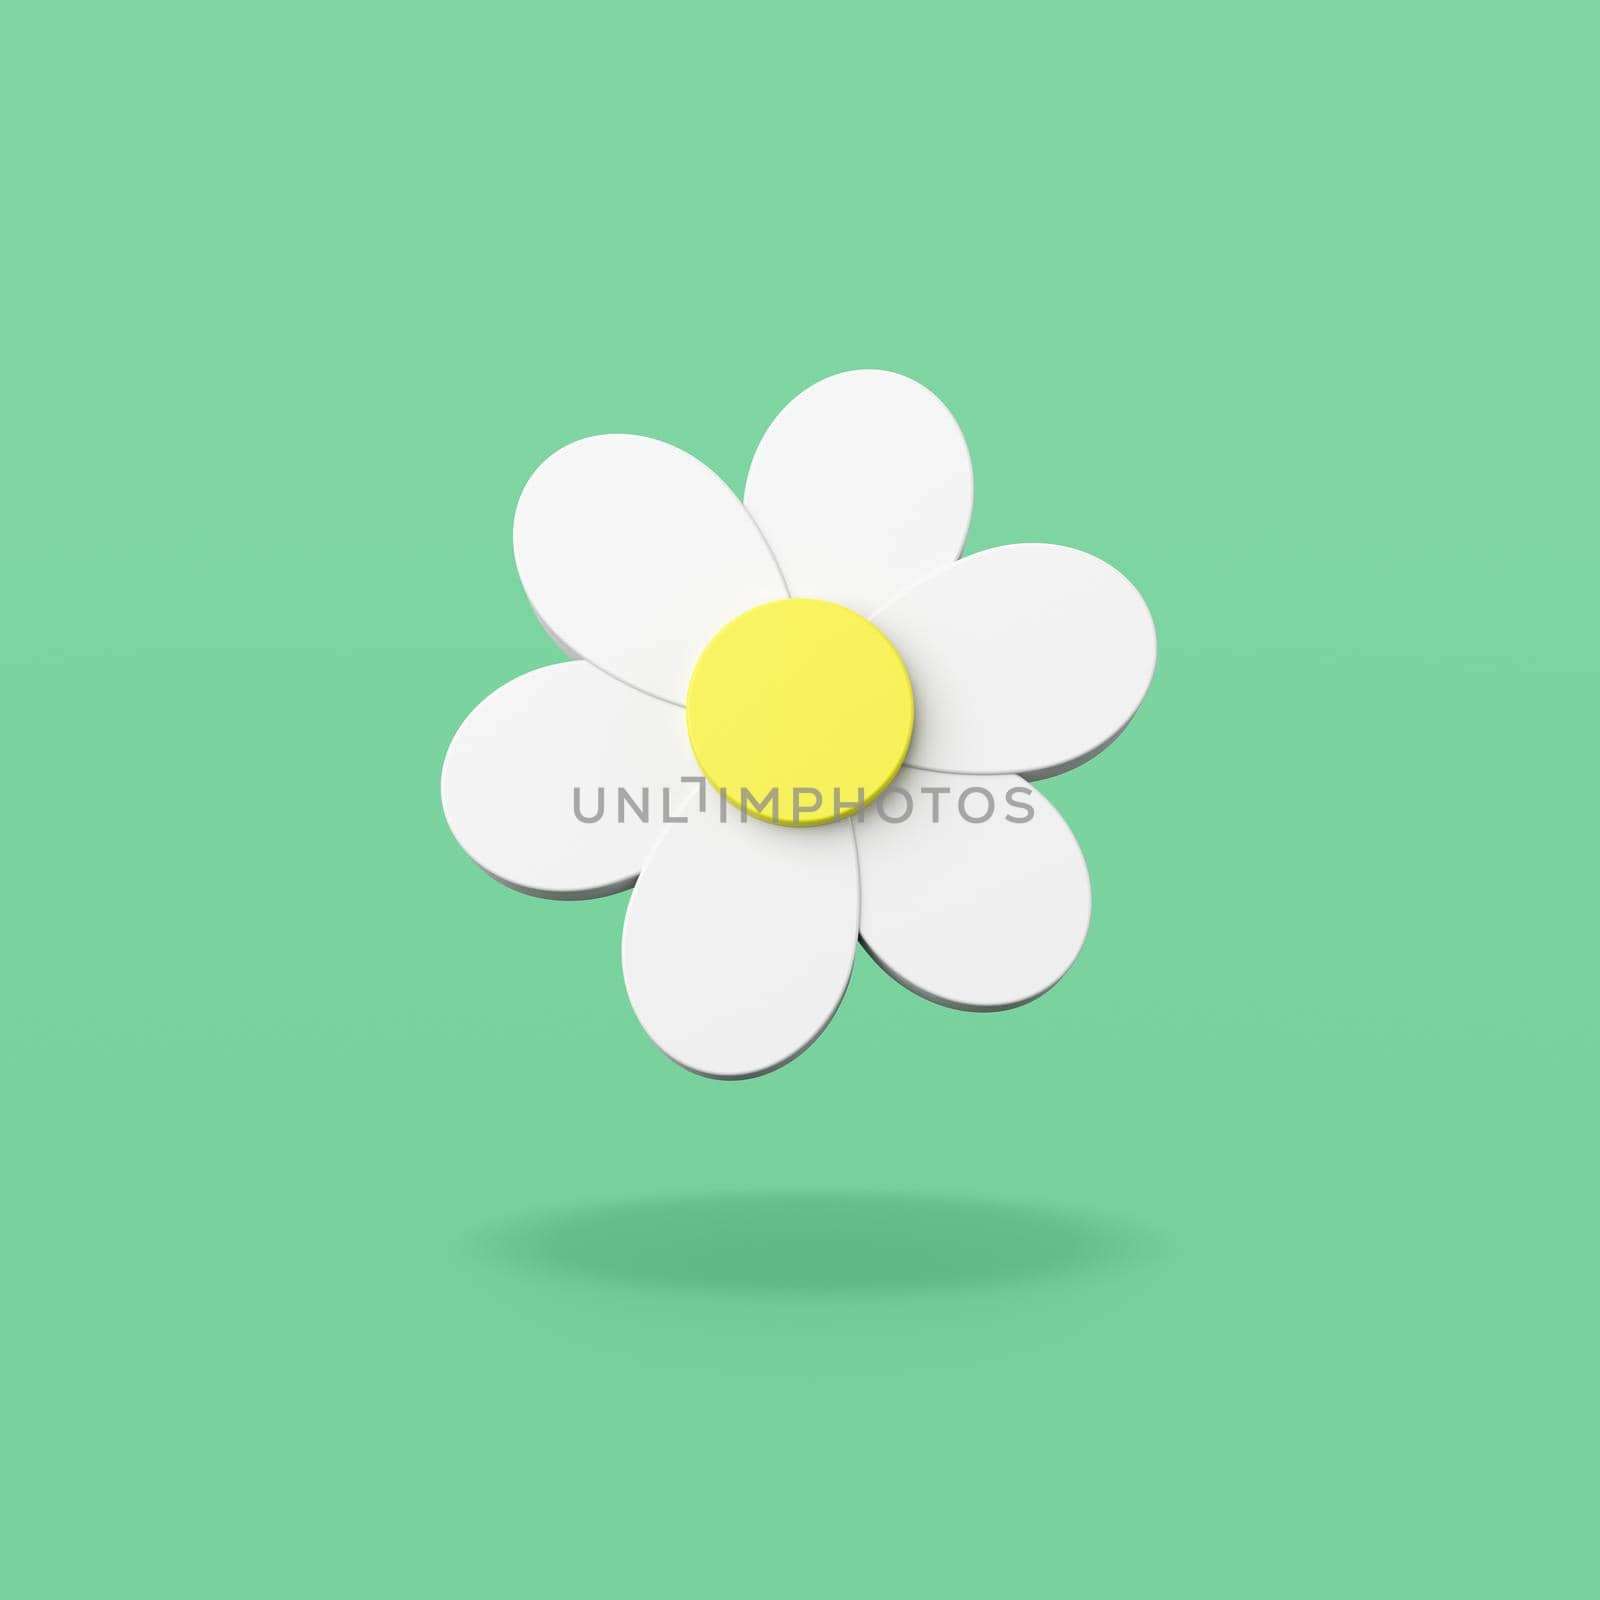 White Daisy Flower 3D Shape on Flat Green Background with Shadow 3D Illustration